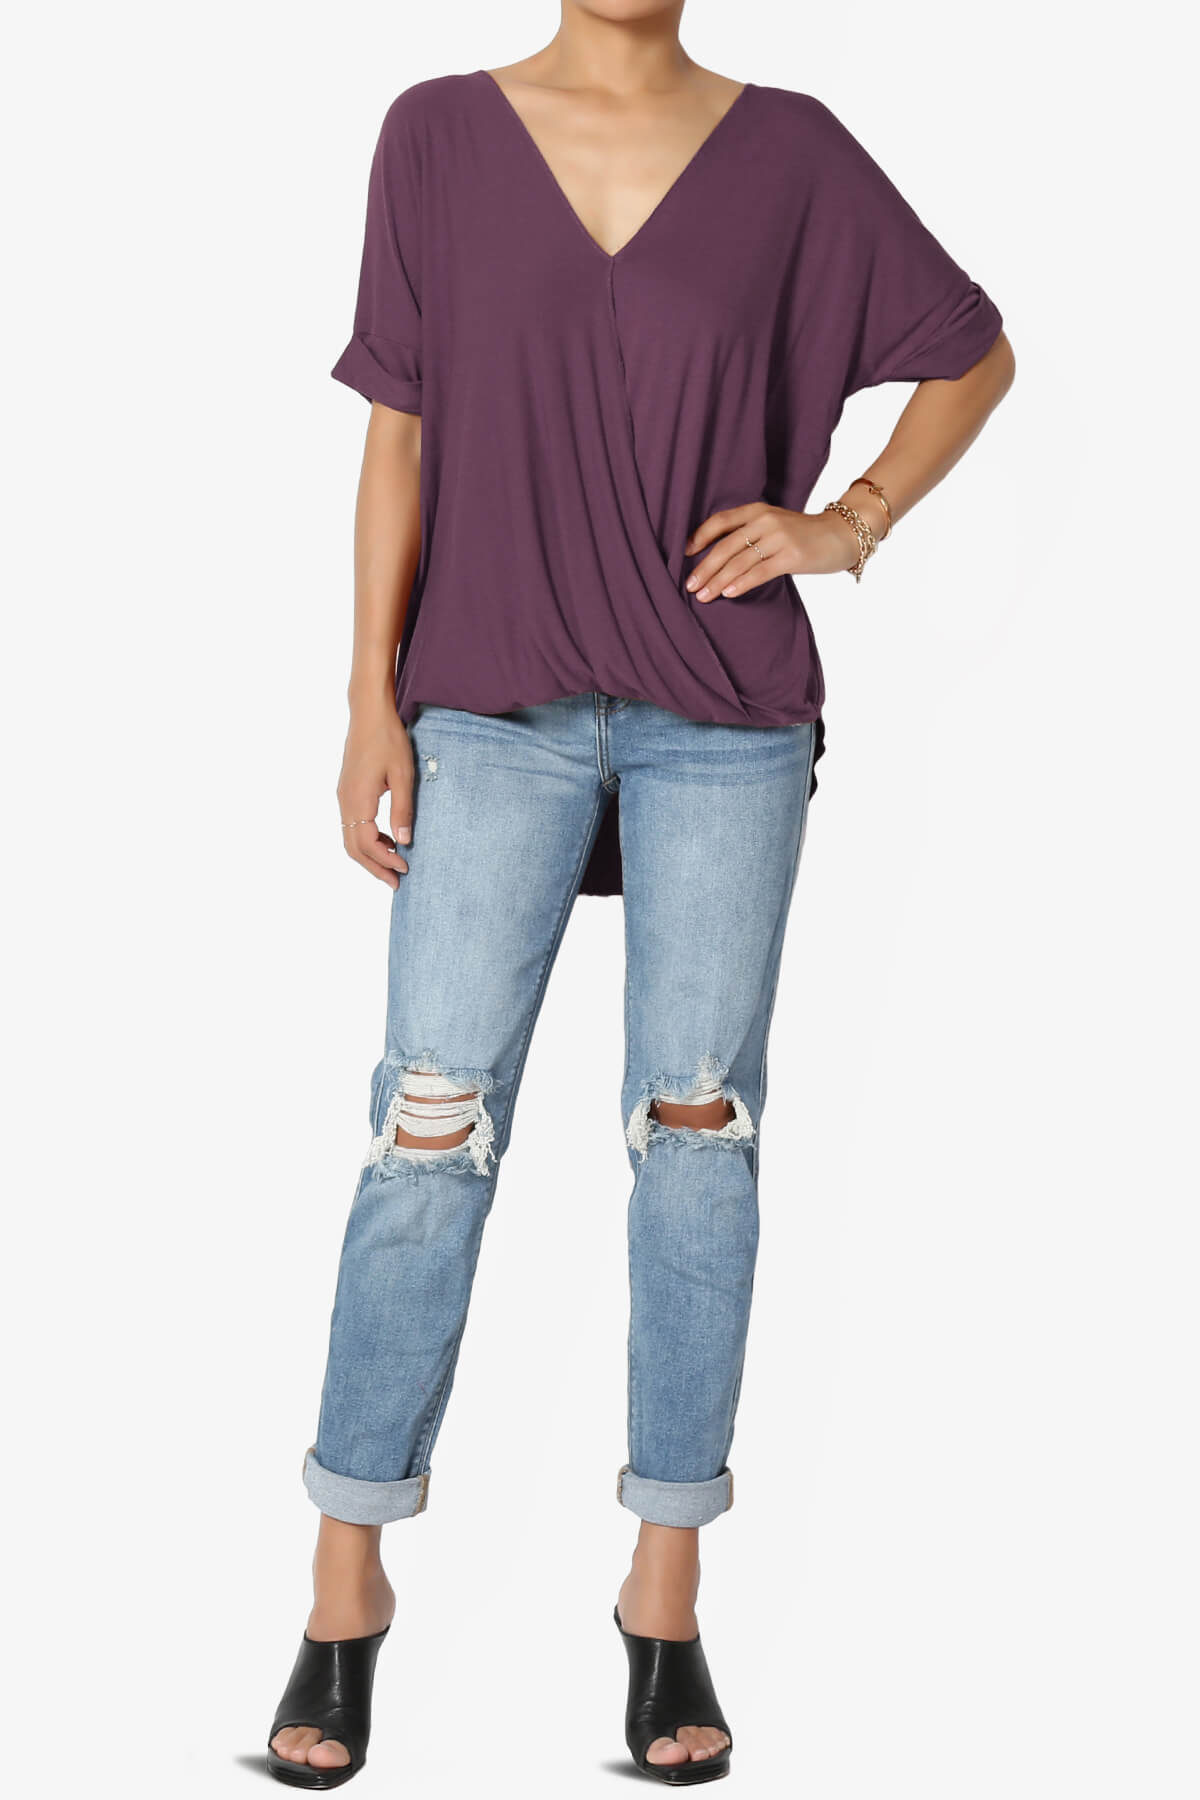 Load image into Gallery viewer, Tackle Wrap Hi-Low Crepe Knit Top DUSTY PLUM_6
